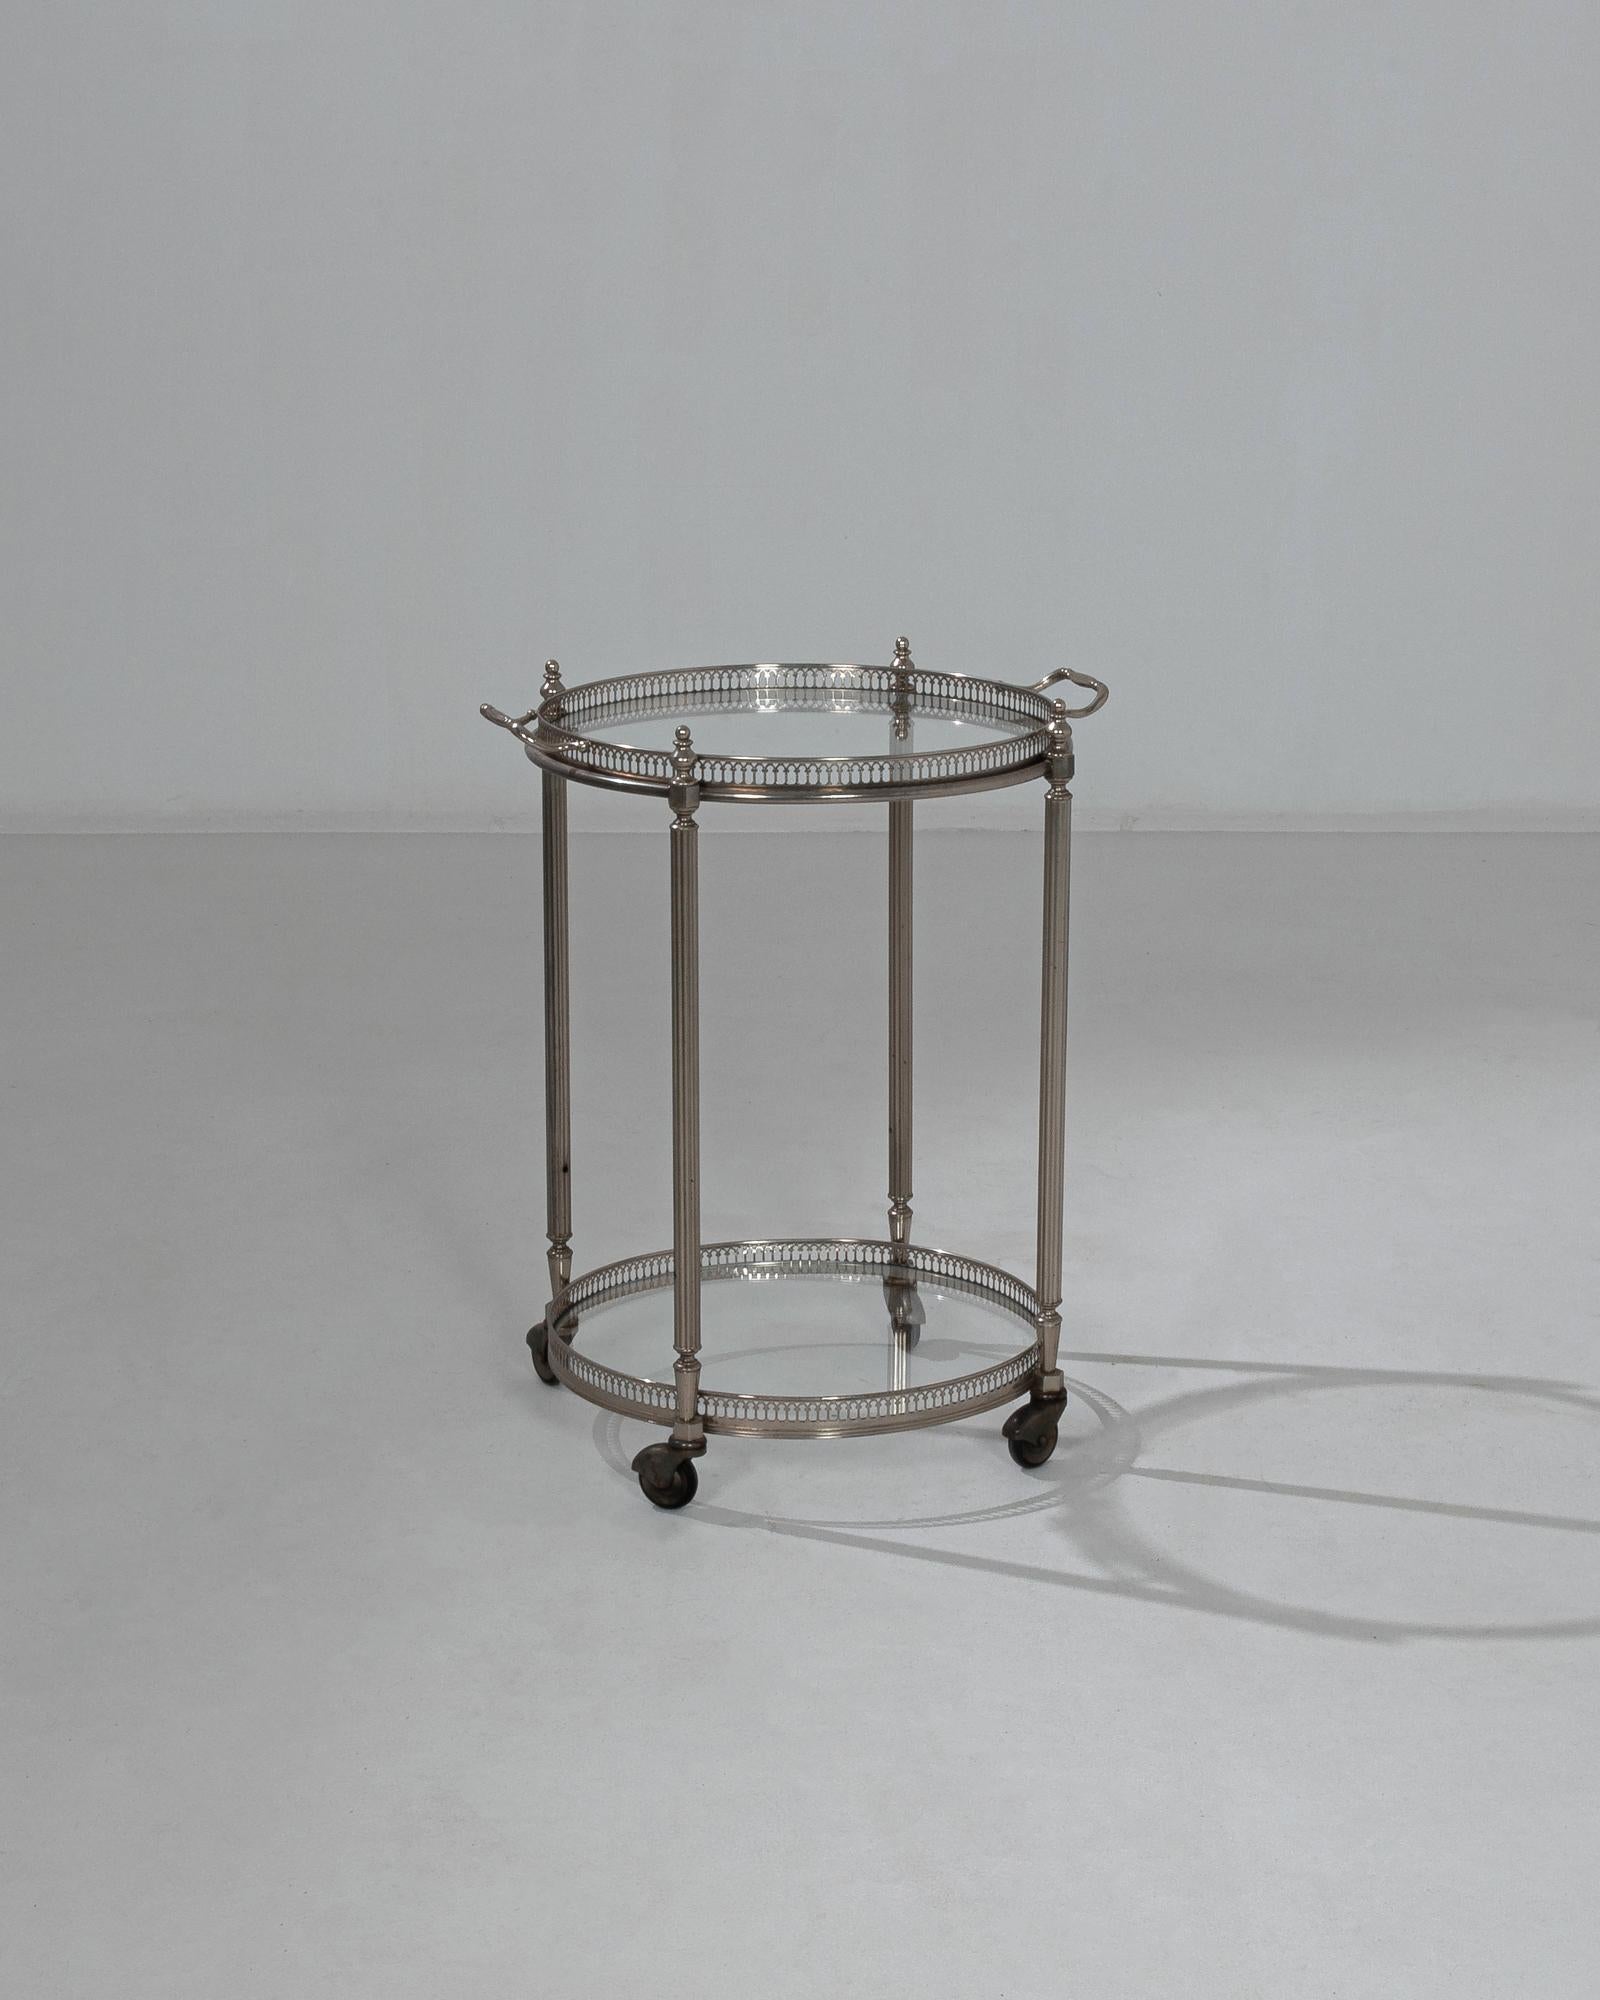 This metal bar cart was made in France, circa 1970, and imparts a genteel elegance with its refined ornamentation and polished patina. Fluted legs topped with spires support both tiers, crowned with a circle of dainty arched spines. Contoured